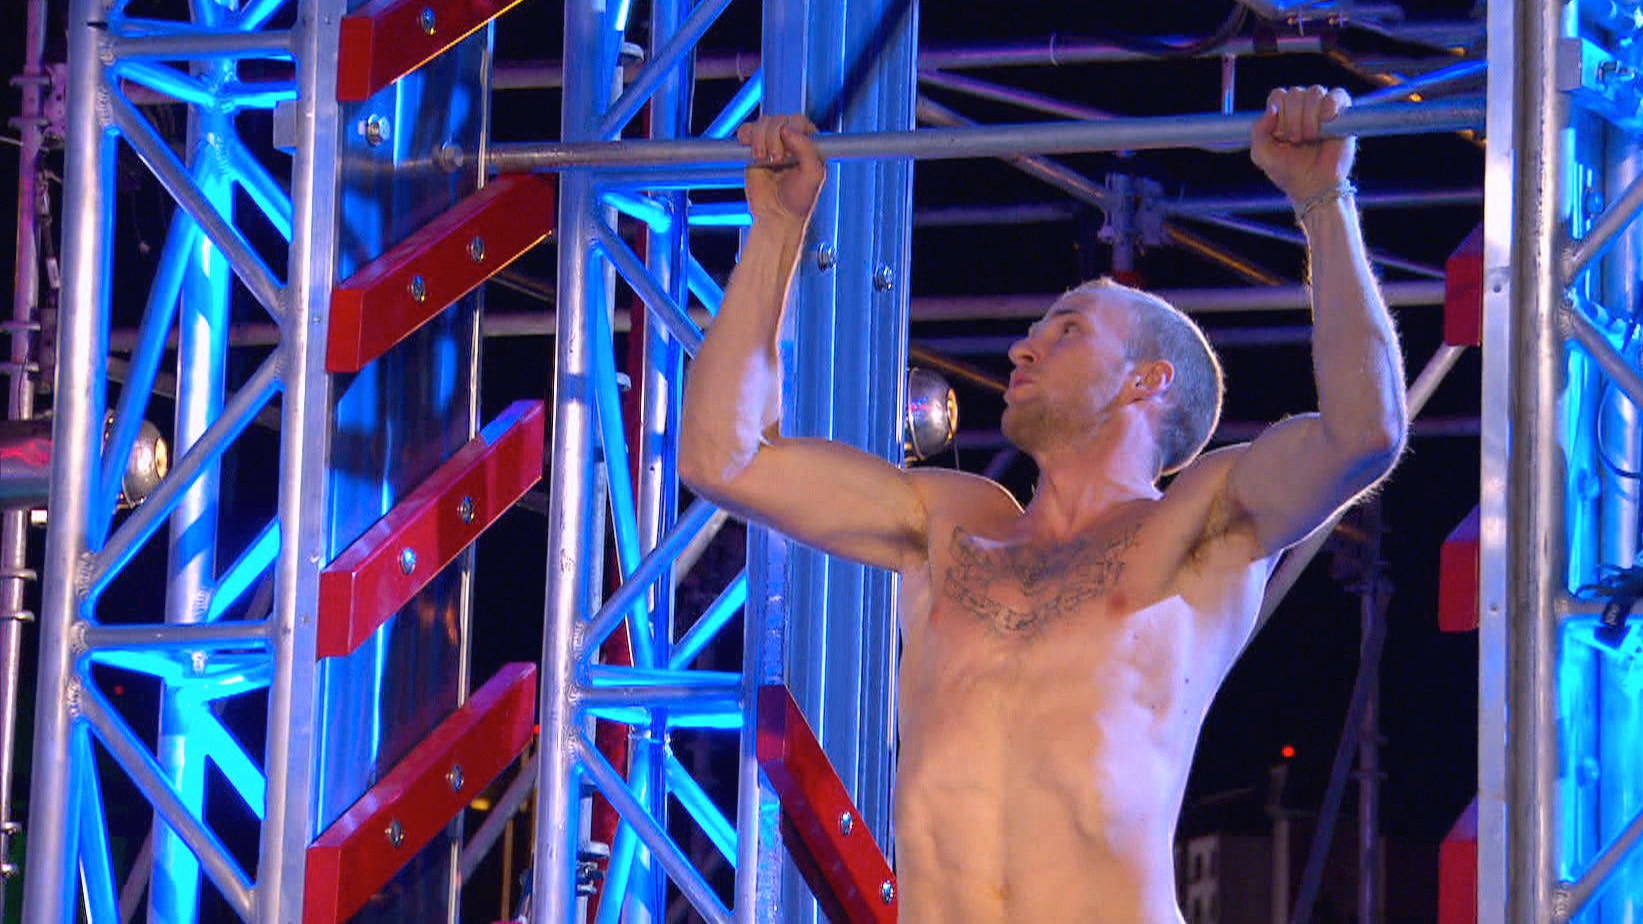 Watch American Ninja Warrior Highlight Elet Hall At Stage 2 Of The 2014 National Finals